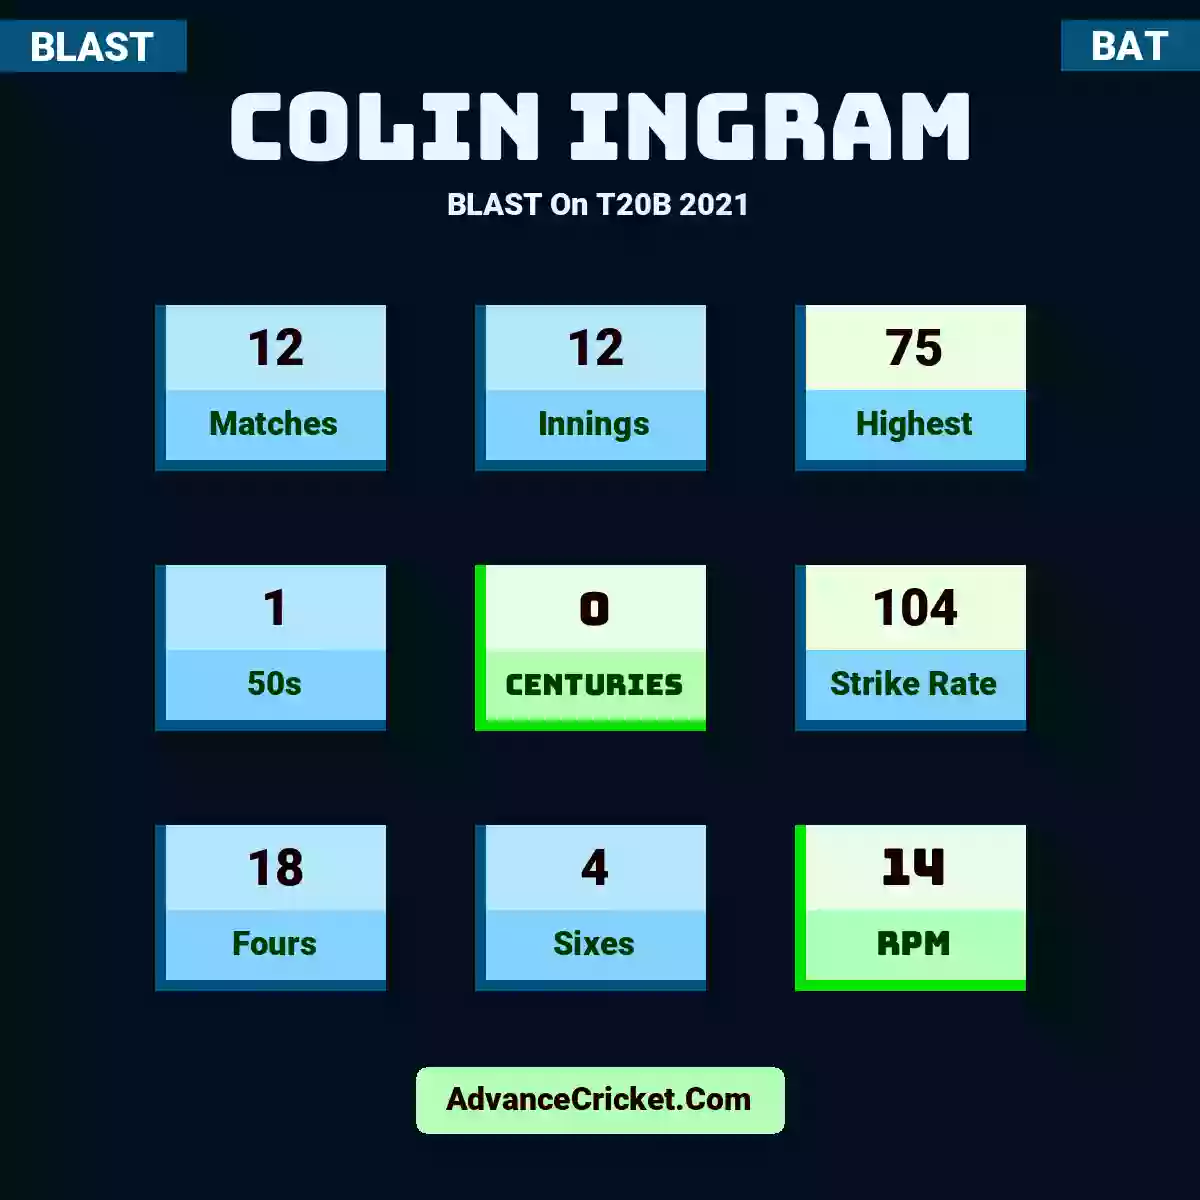 Colin Ingram BLAST  On T20B 2021, Colin Ingram played 12 matches, scored 75 runs as highest, 1 half-centuries, and 0 centuries, with a strike rate of 104. C.Ingram hit 18 fours and 4 sixes, with an RPM of 14.